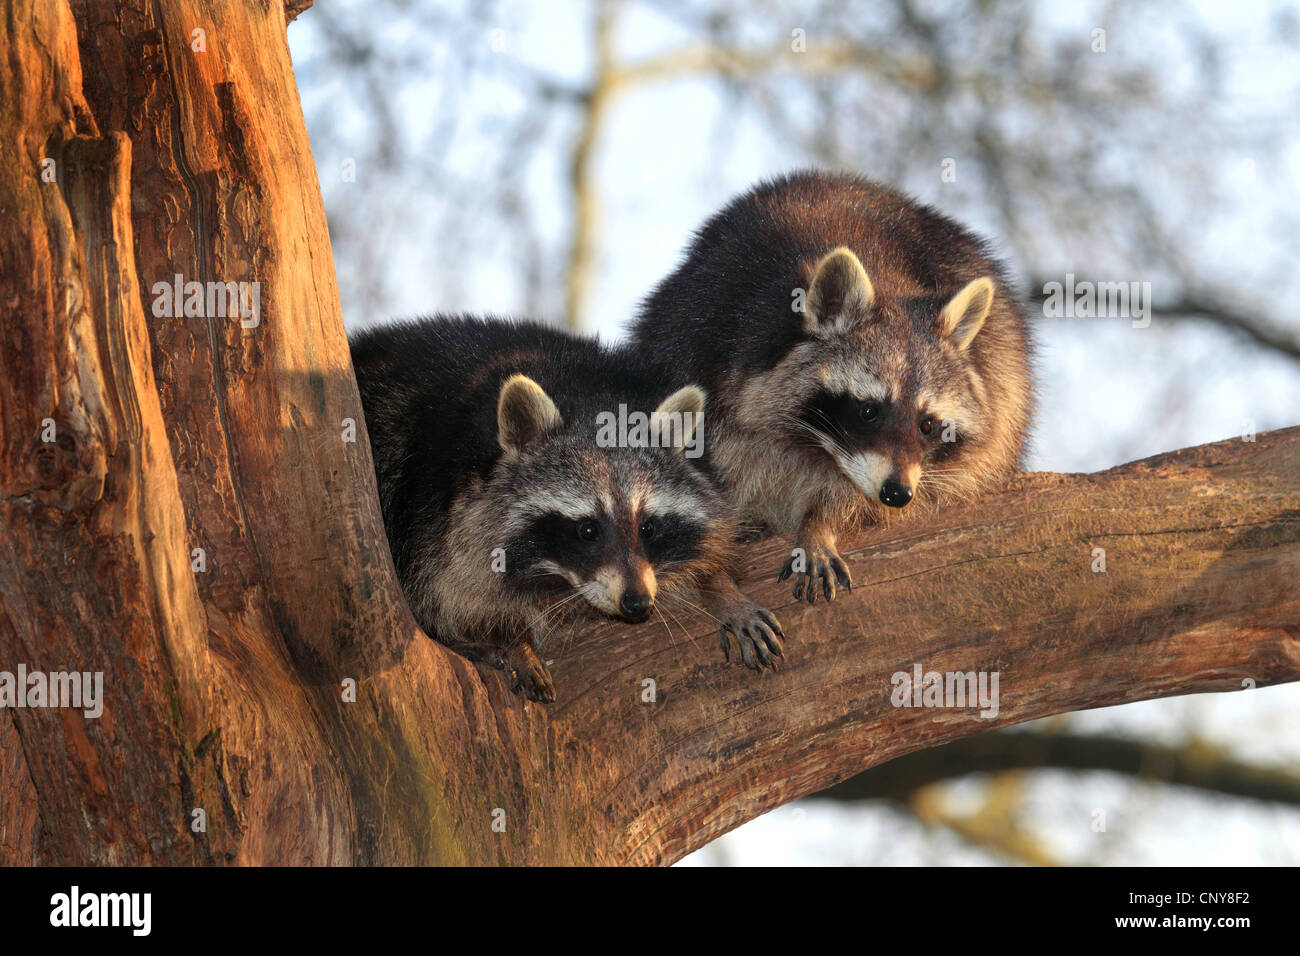 common raccoon (Procyon lotor), two raccoons on a tree, Germany Stock Photo